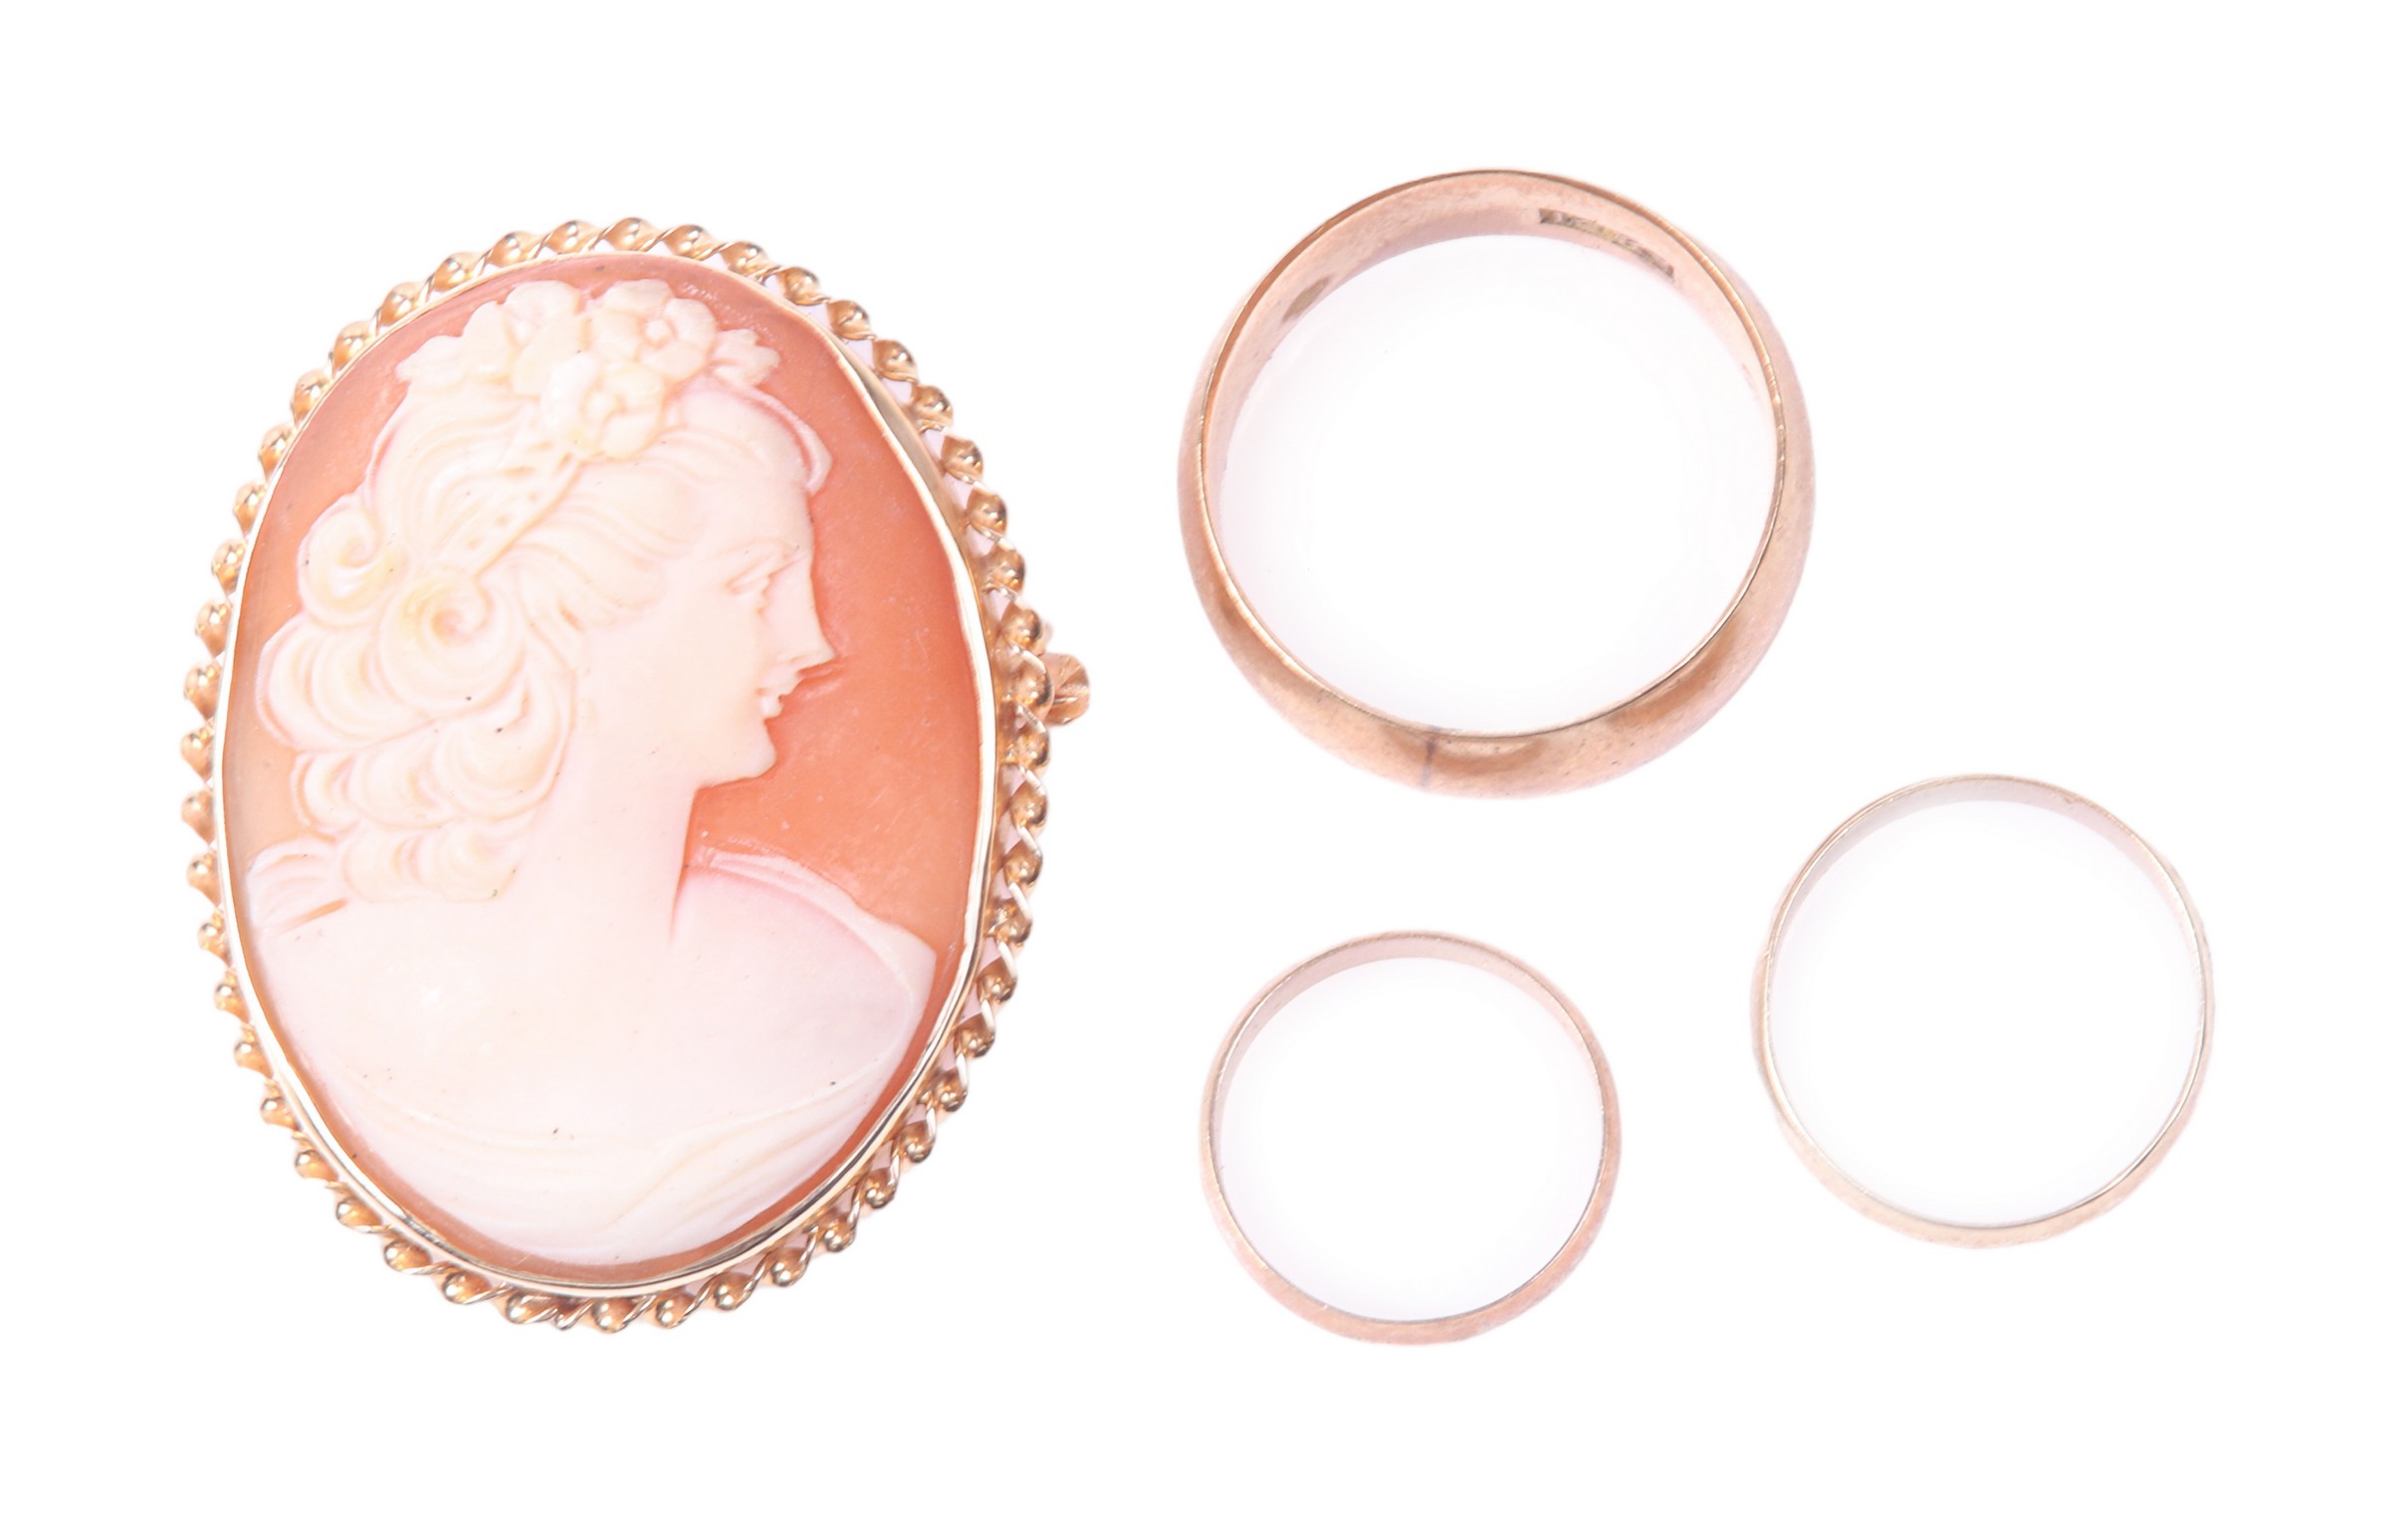  4 Gold rings and cameo brooch 2e0b8c